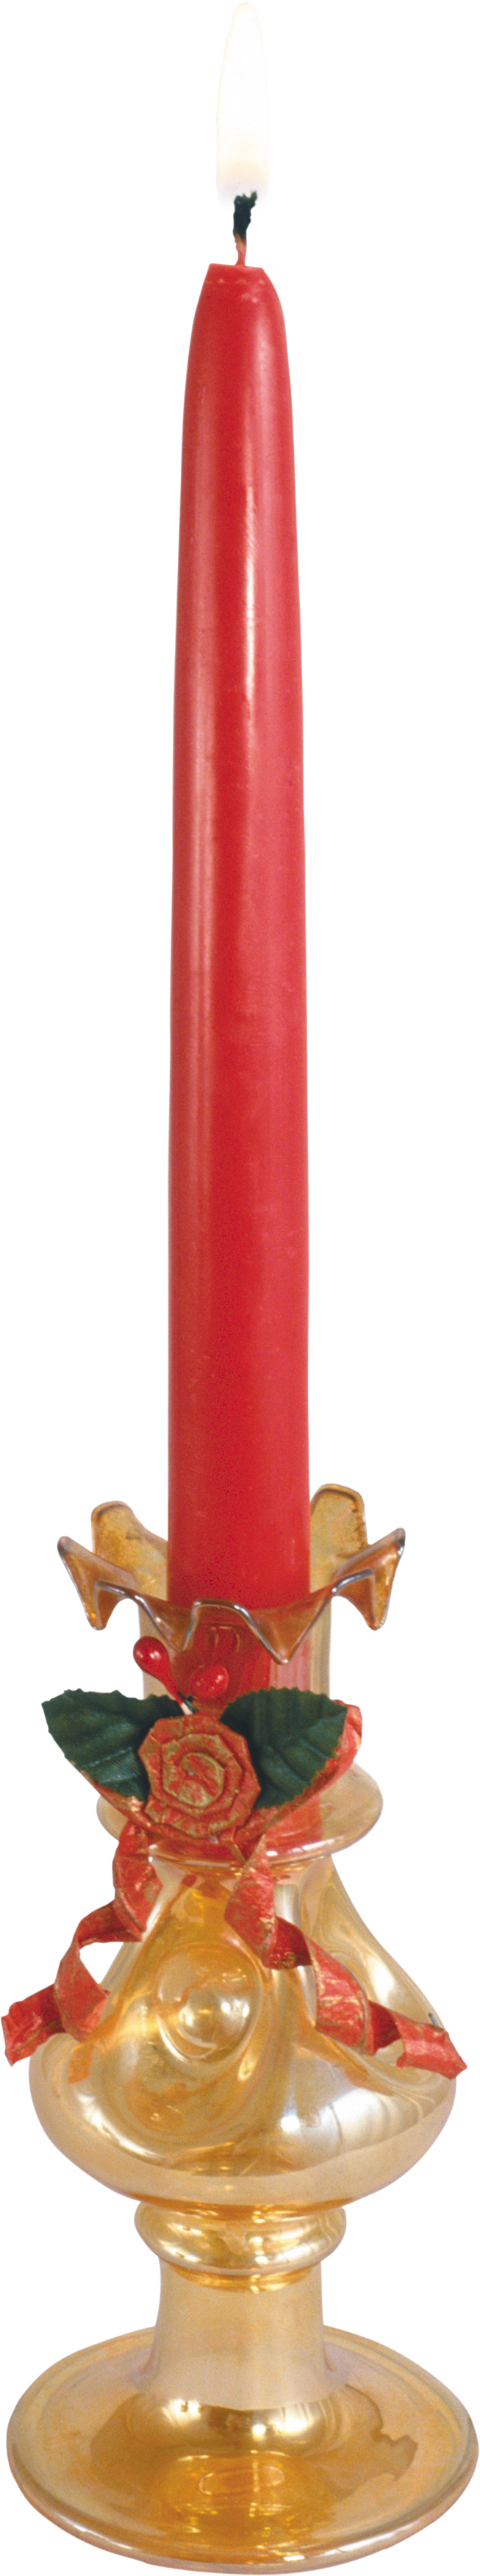 Red  Candle's PNG Image